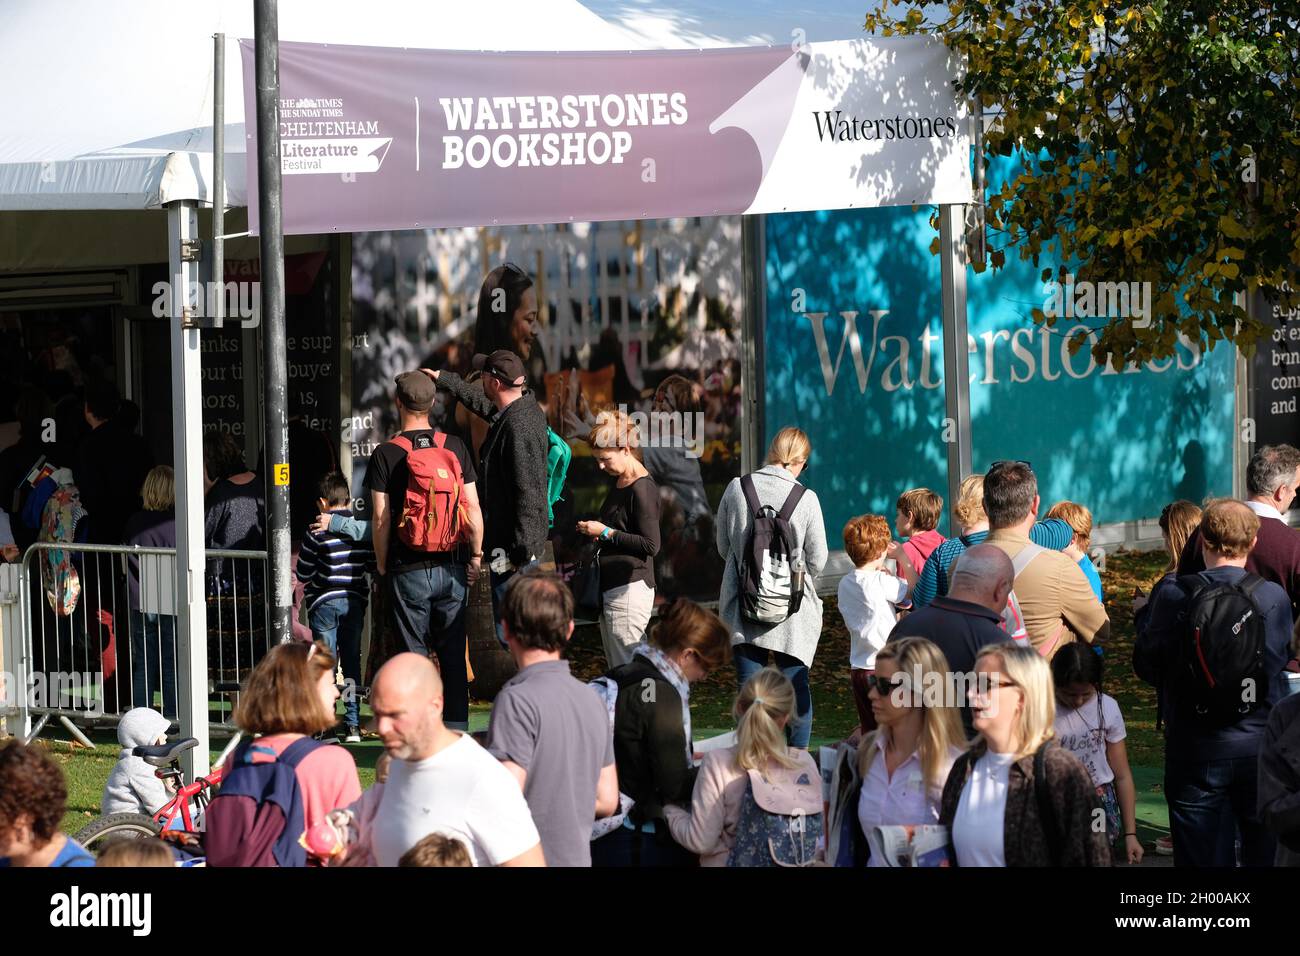 Cheltenham Literature Festival, Cheltenham, UK - Sunday 10th October 2021 - Busy scene outside the Festival bookshop on a sunny Sunday afternoon - the book Festival runs until Sunday 17th October. Photo Steven May / Alamy Live News Stock Photo